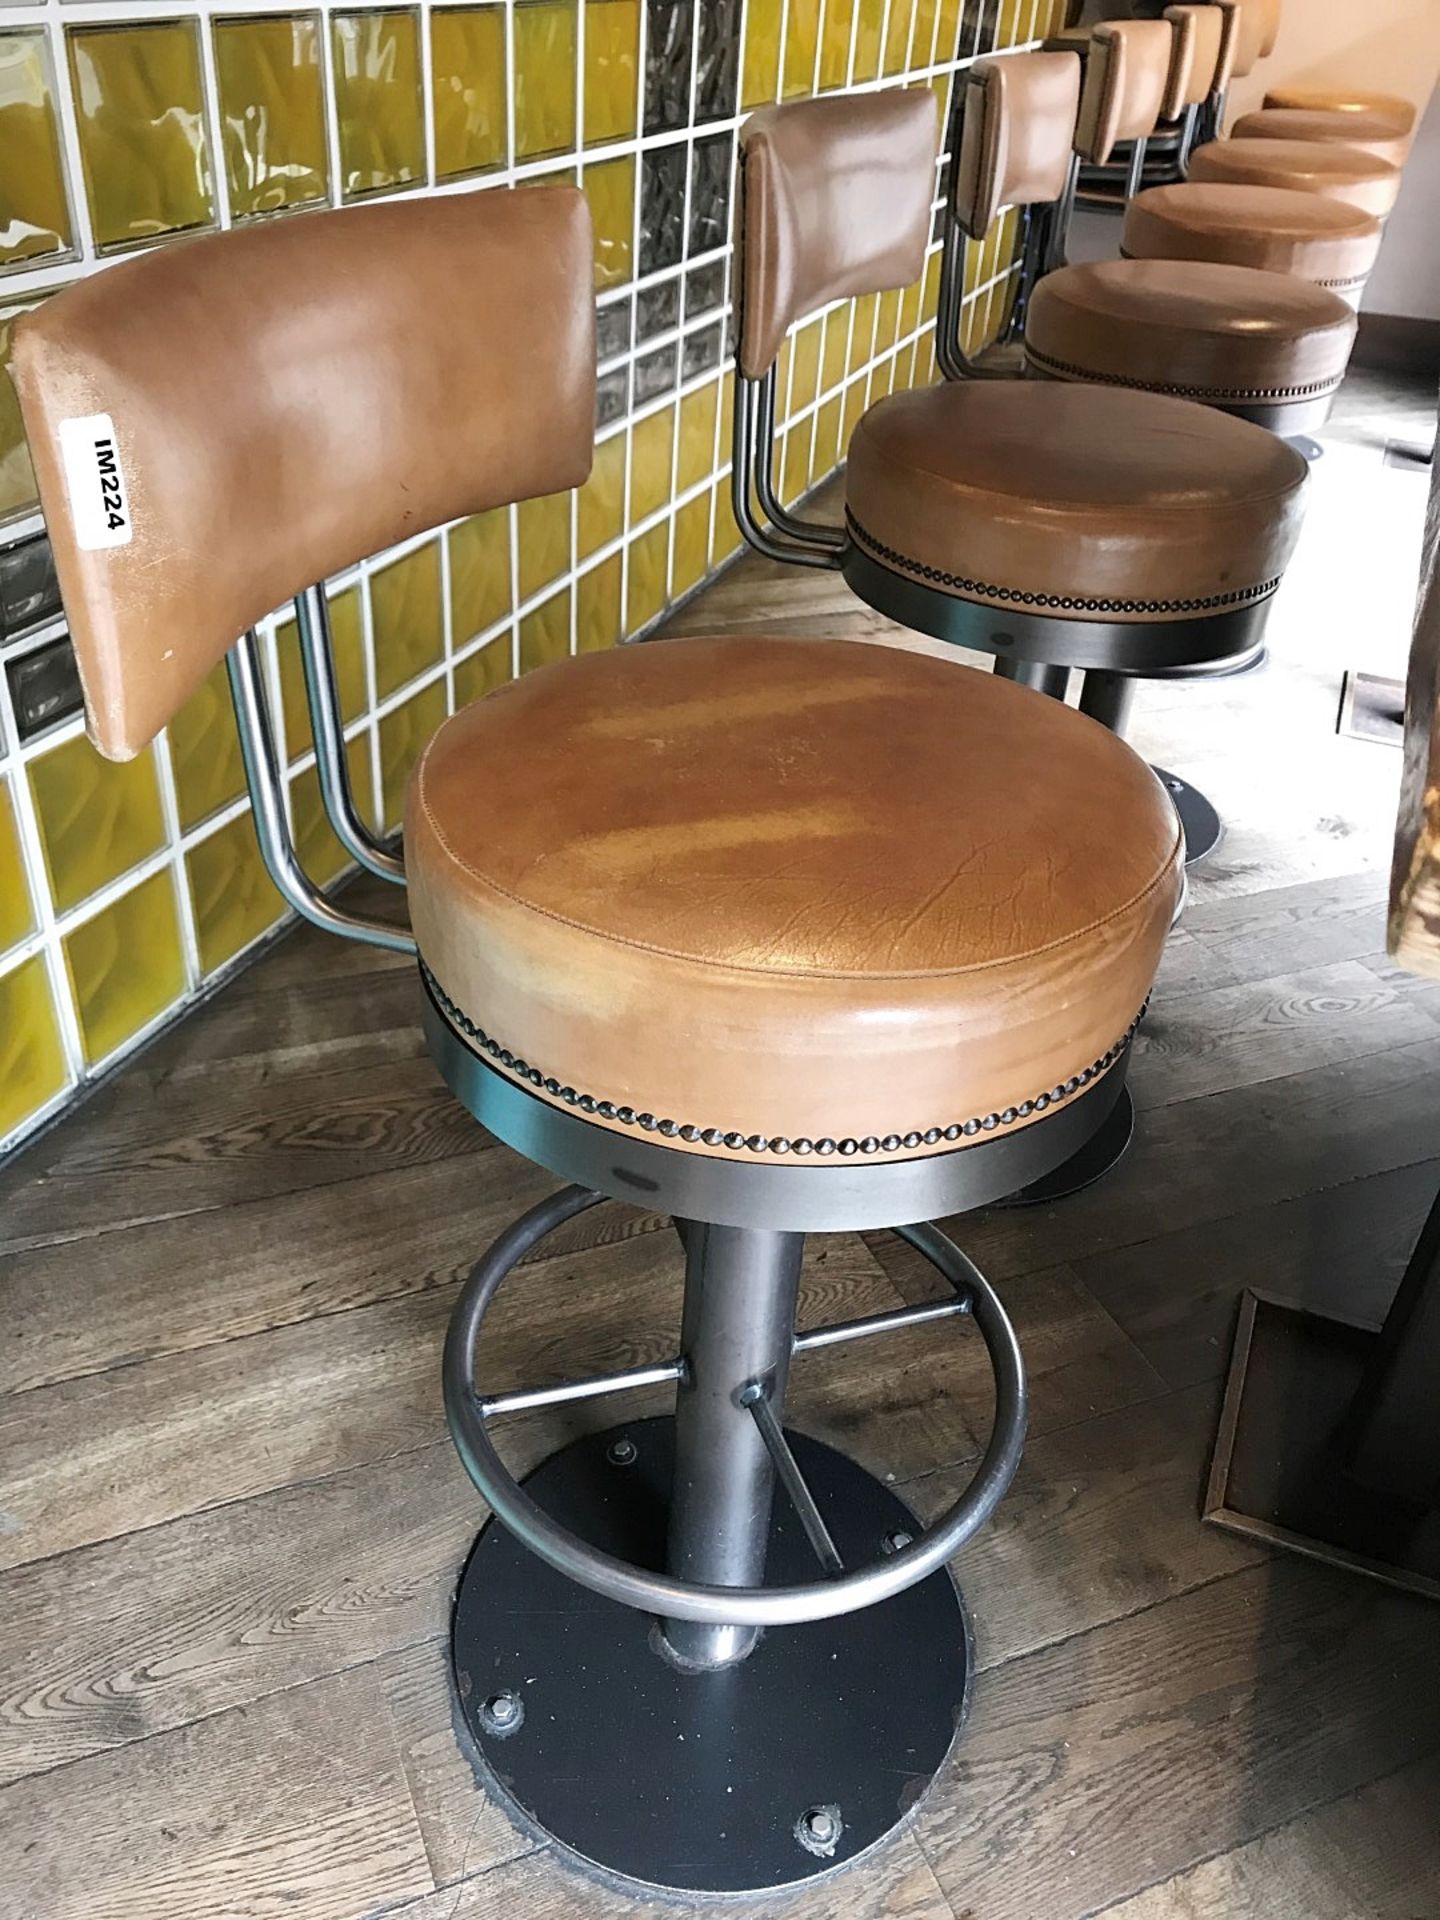 7 x Tan Leather Bar Stools With Backrests, Studded Detail and Footrests - H77/100 x W41 cms - - Image 2 of 5